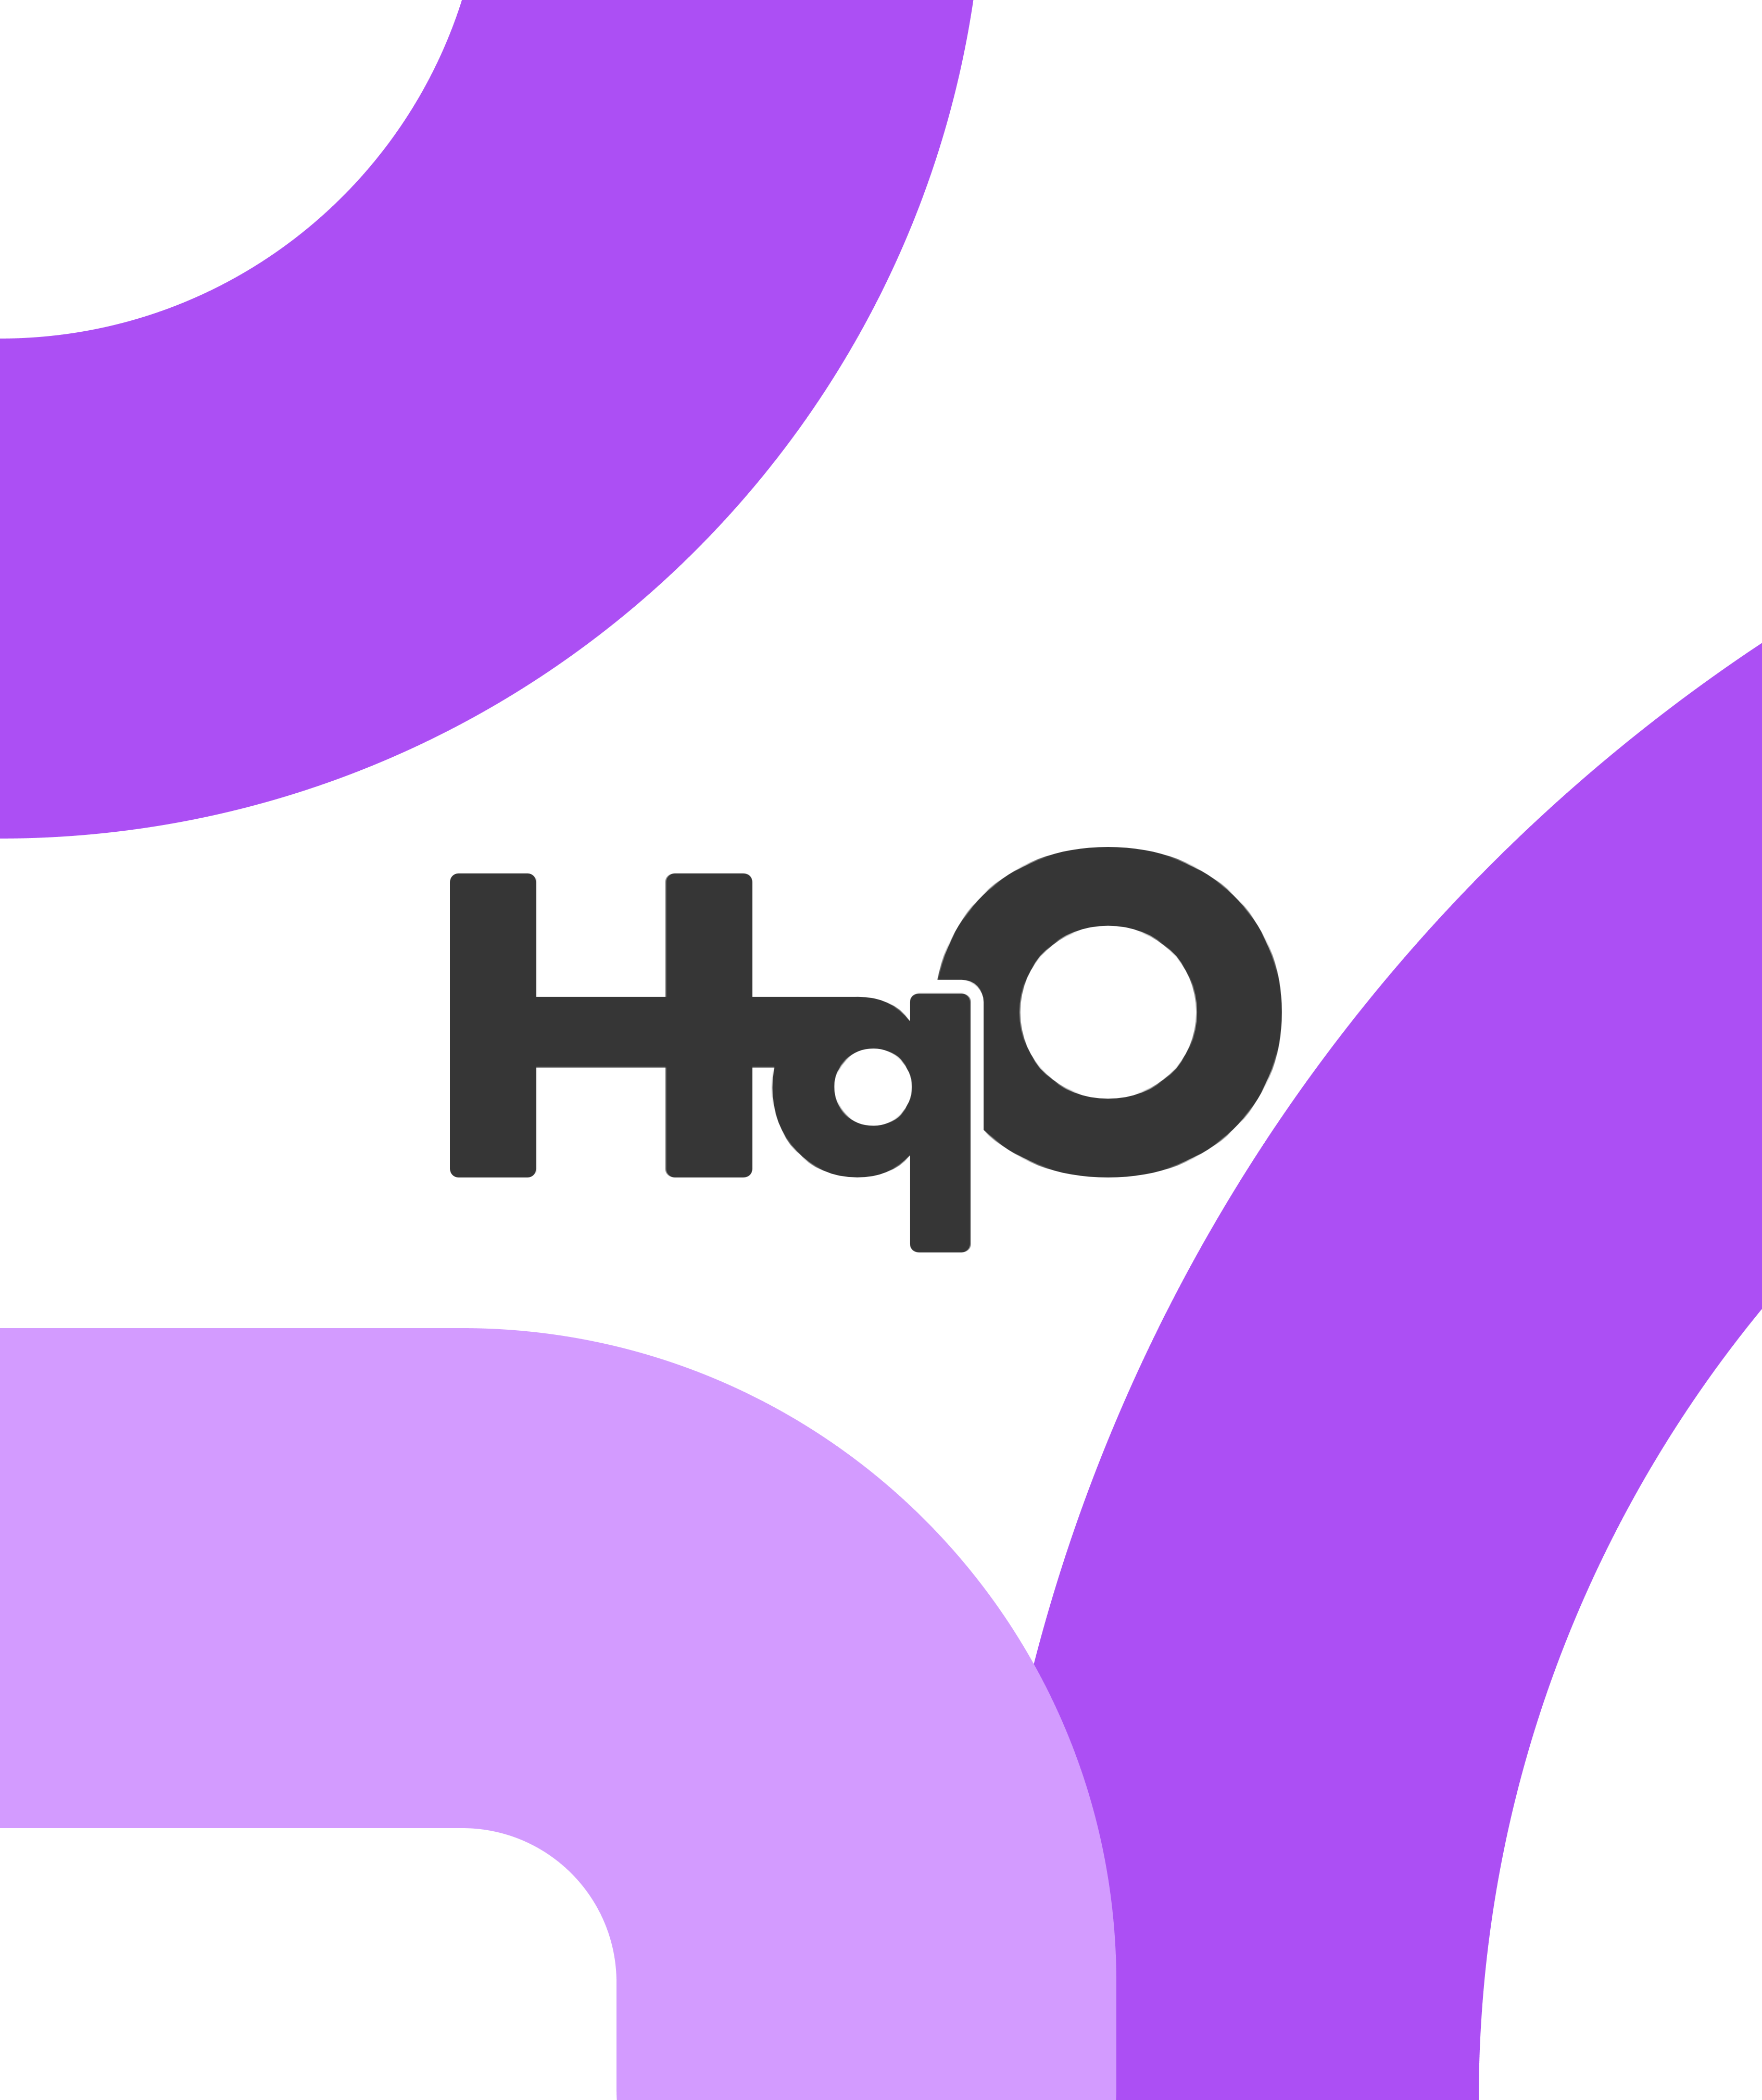 HqO triples research efficiency and delivers a user-driven product to market faster with Maze 